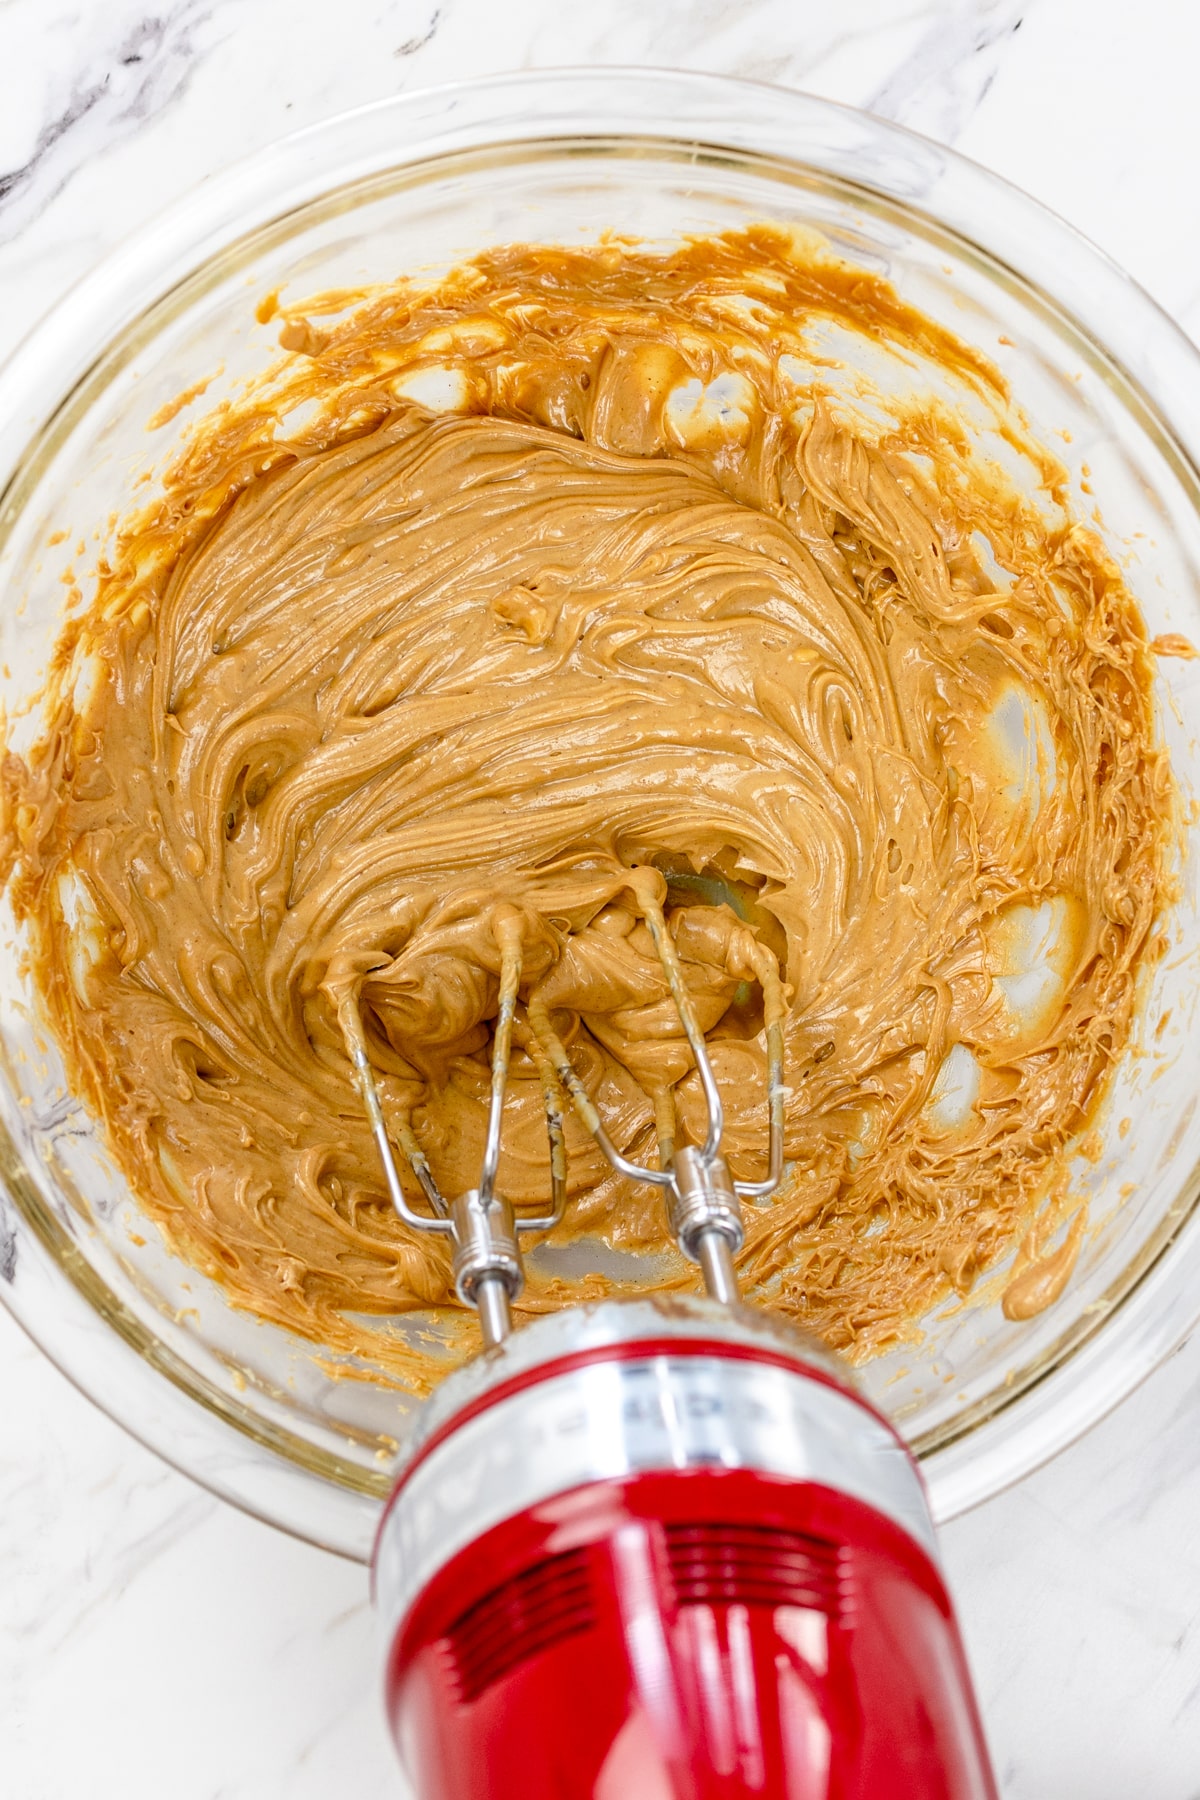 Top view of glass mixing bowl with peanut butter and butter being mixed together with a mixer.